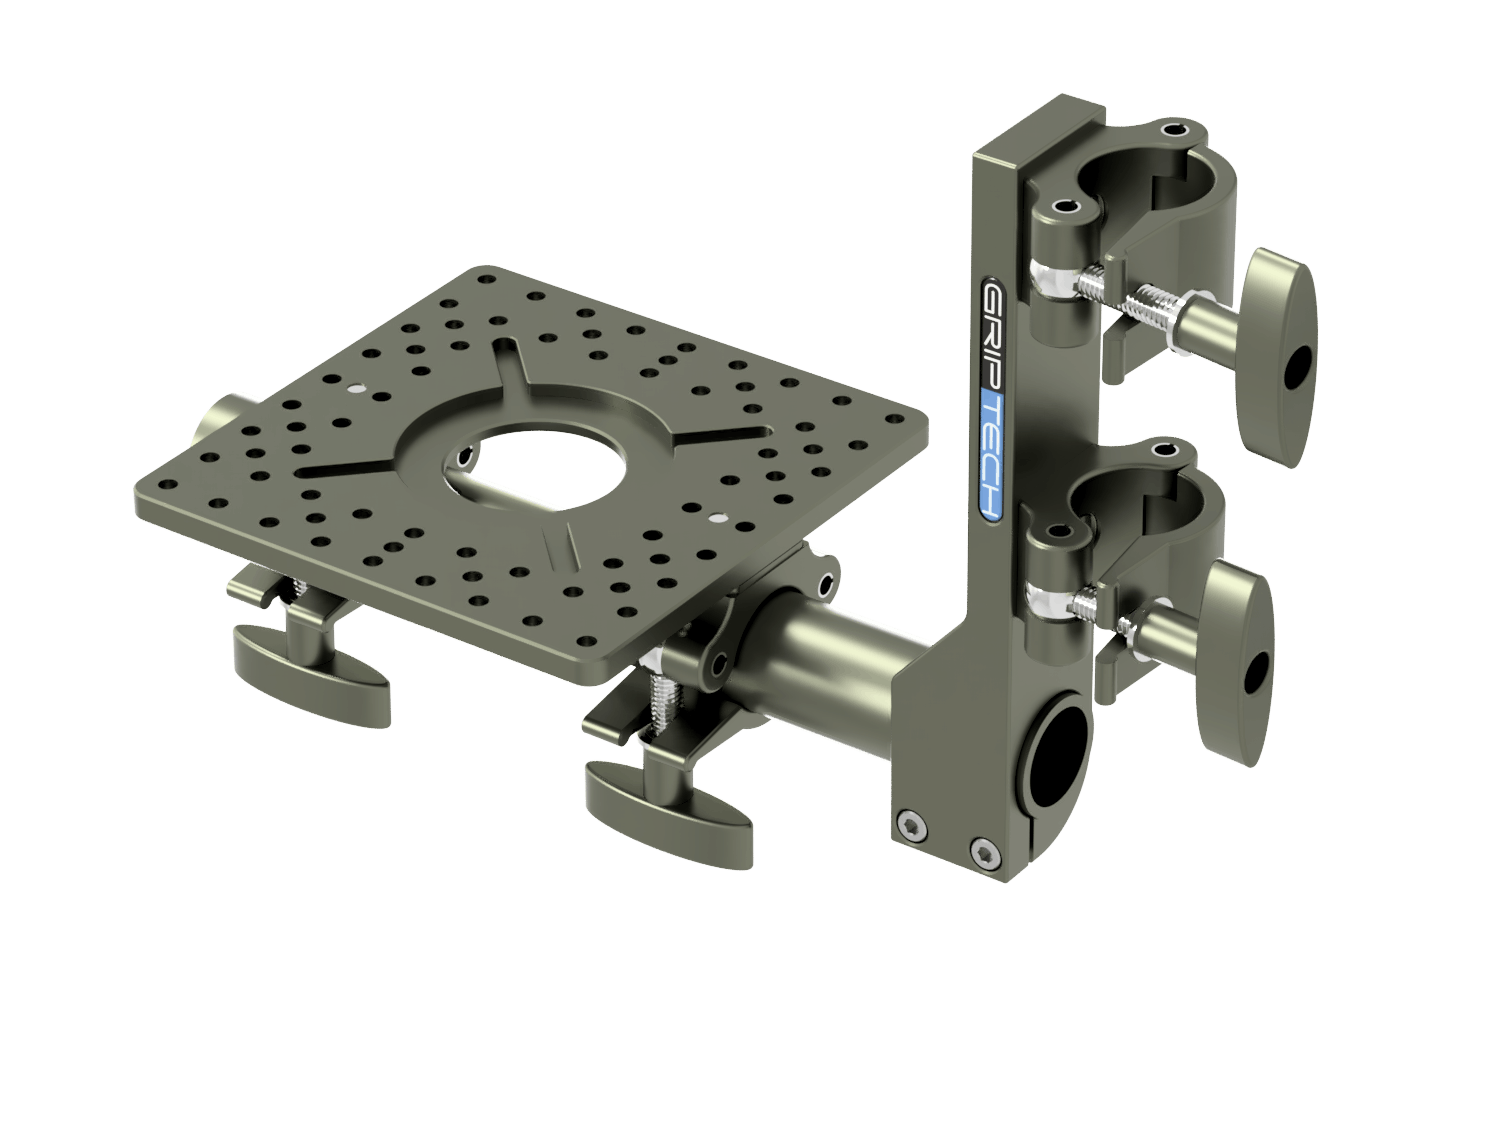 T Bar Bracket+ 1 Scaff Tube (L=600mm) + 1 Small Mounting Plate  + 2 Scaff Half Clamps